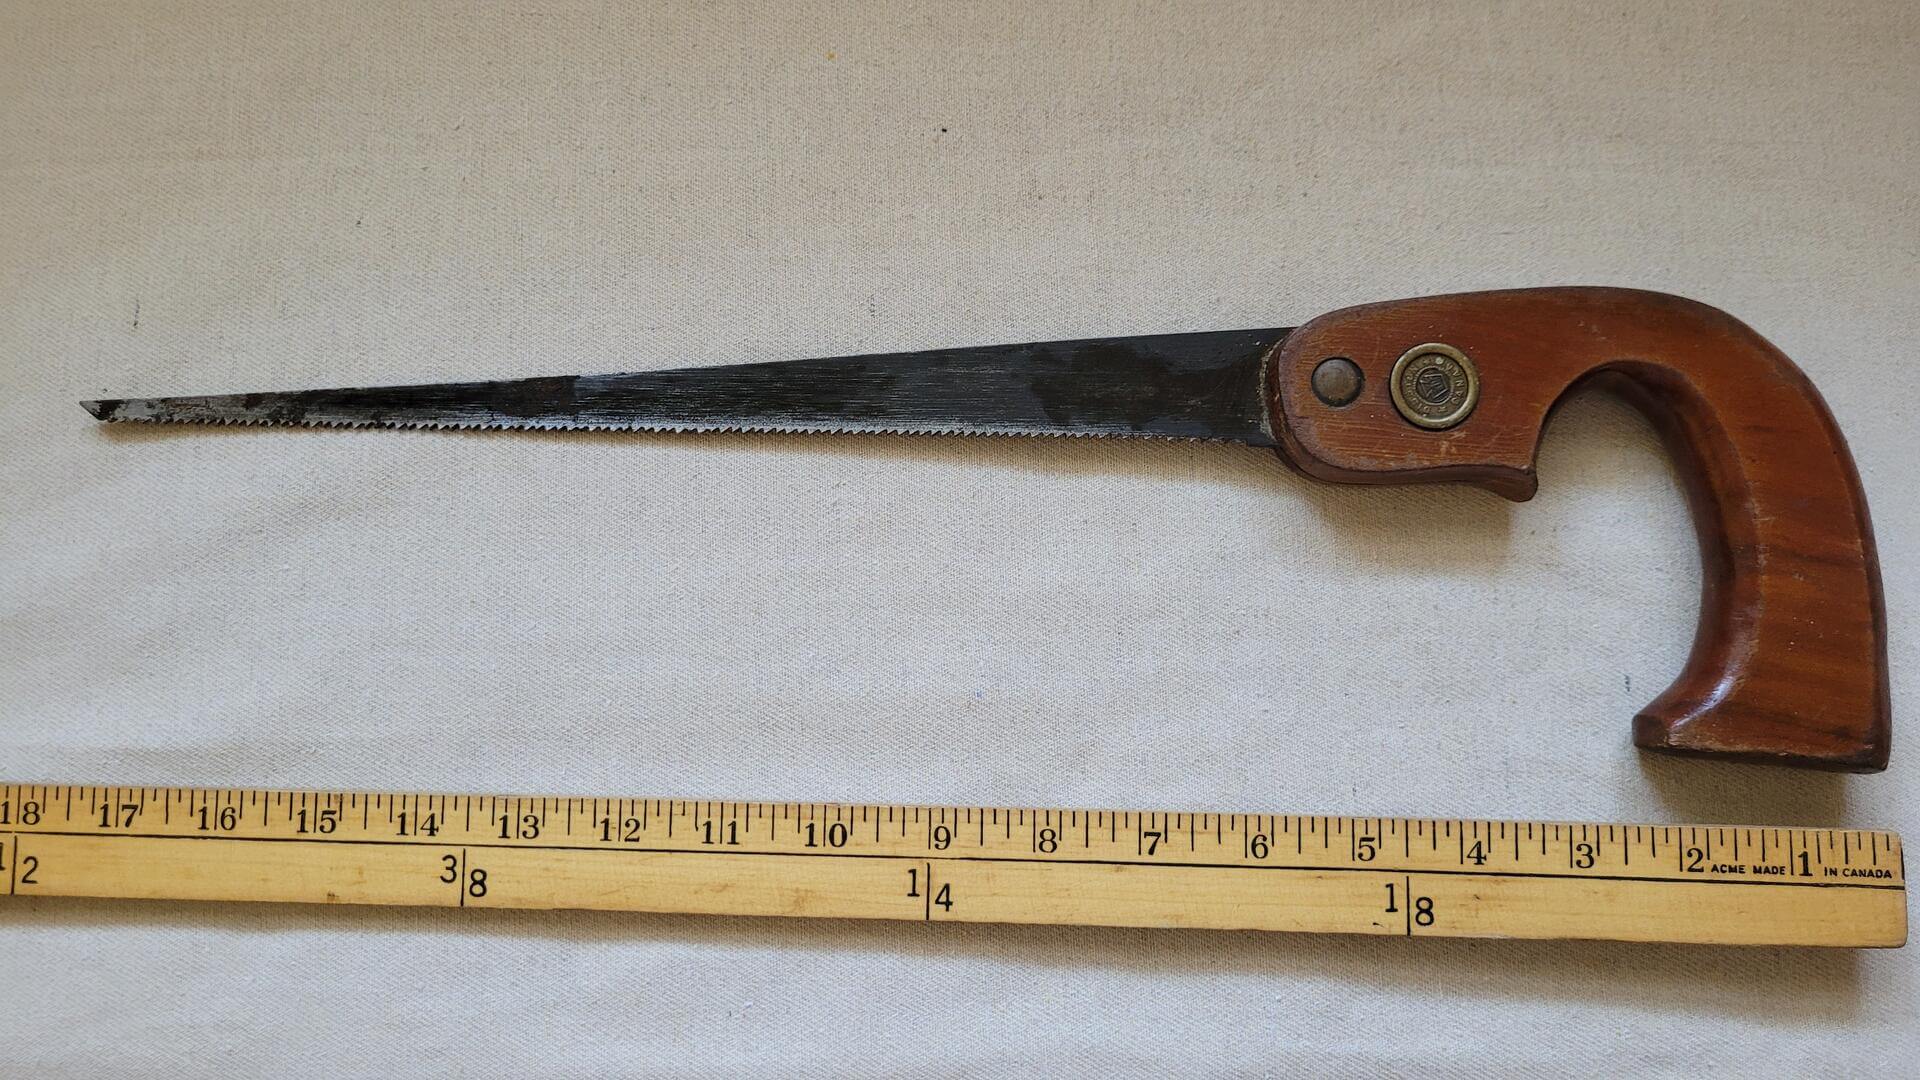 Vintage Disston Canada Compass Keyhole Saw 12 Inch Blade Toronto ON - Antique Collectible Woodworking and Carpentry Canadiana Tools